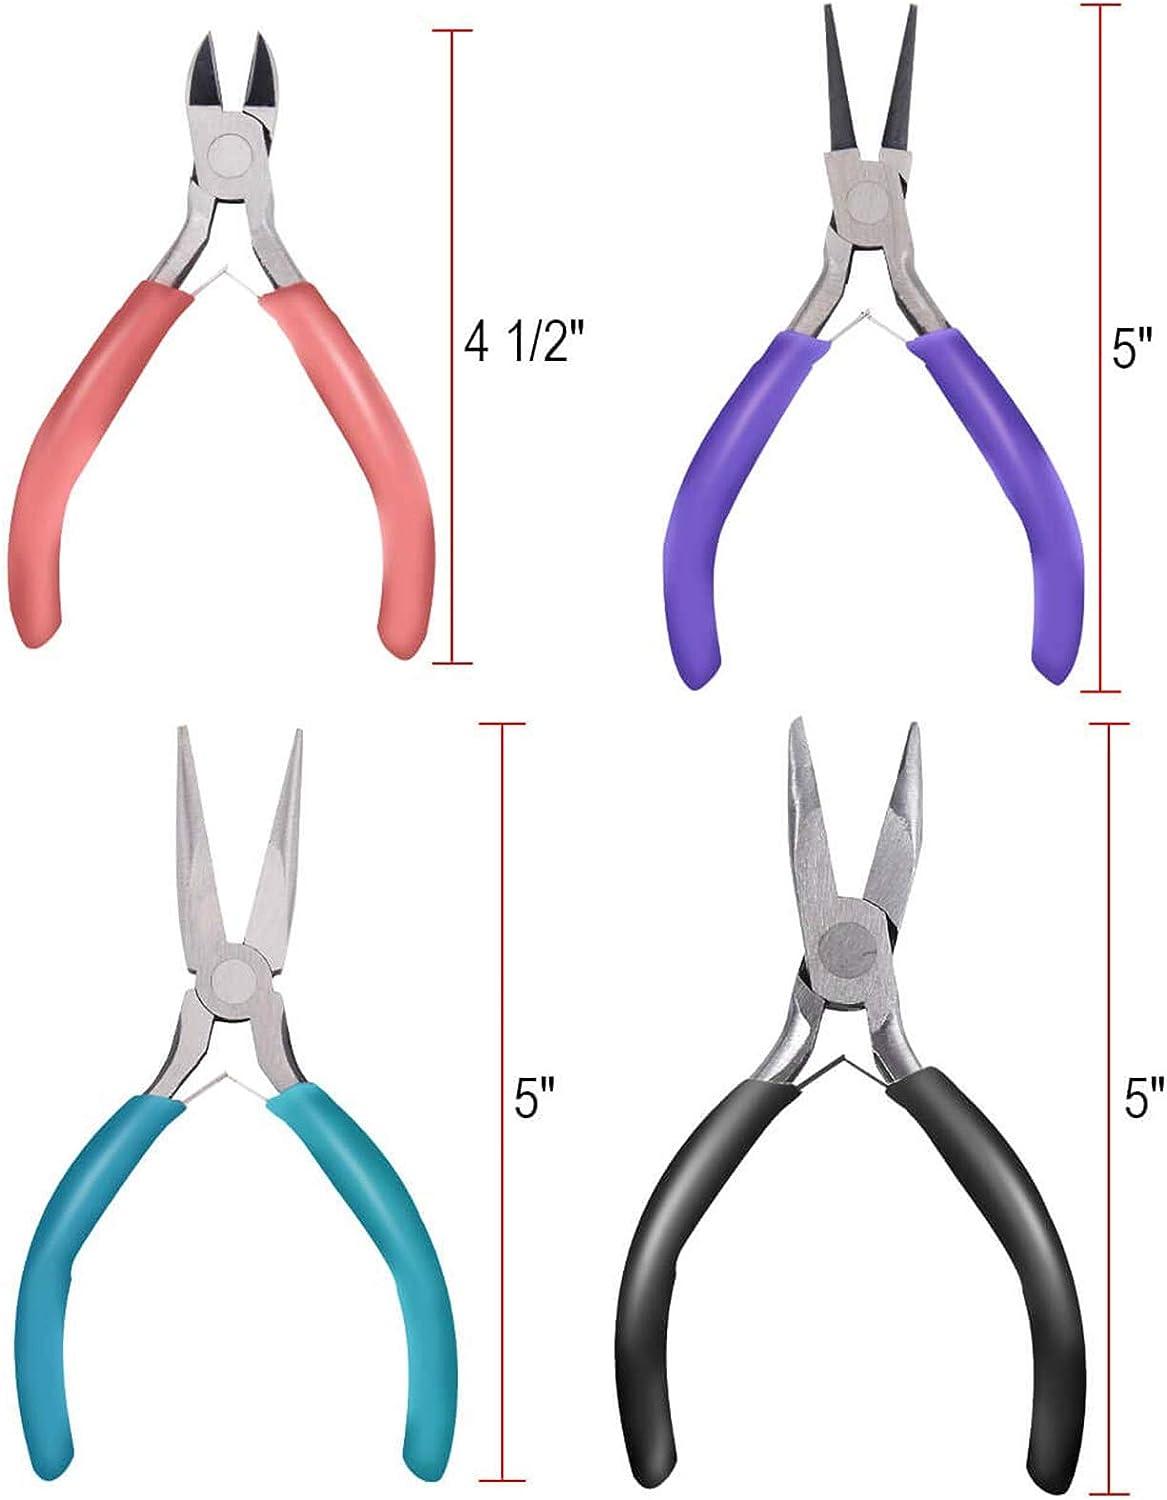 4 Pack Jewelry Pliers Jewelry Making Pliers Tools Kit with Needle Nose  Pliers/Chain Nose Pliers, Round Nose Pliers, Bent Nose Pliers, Wire Cutters  for